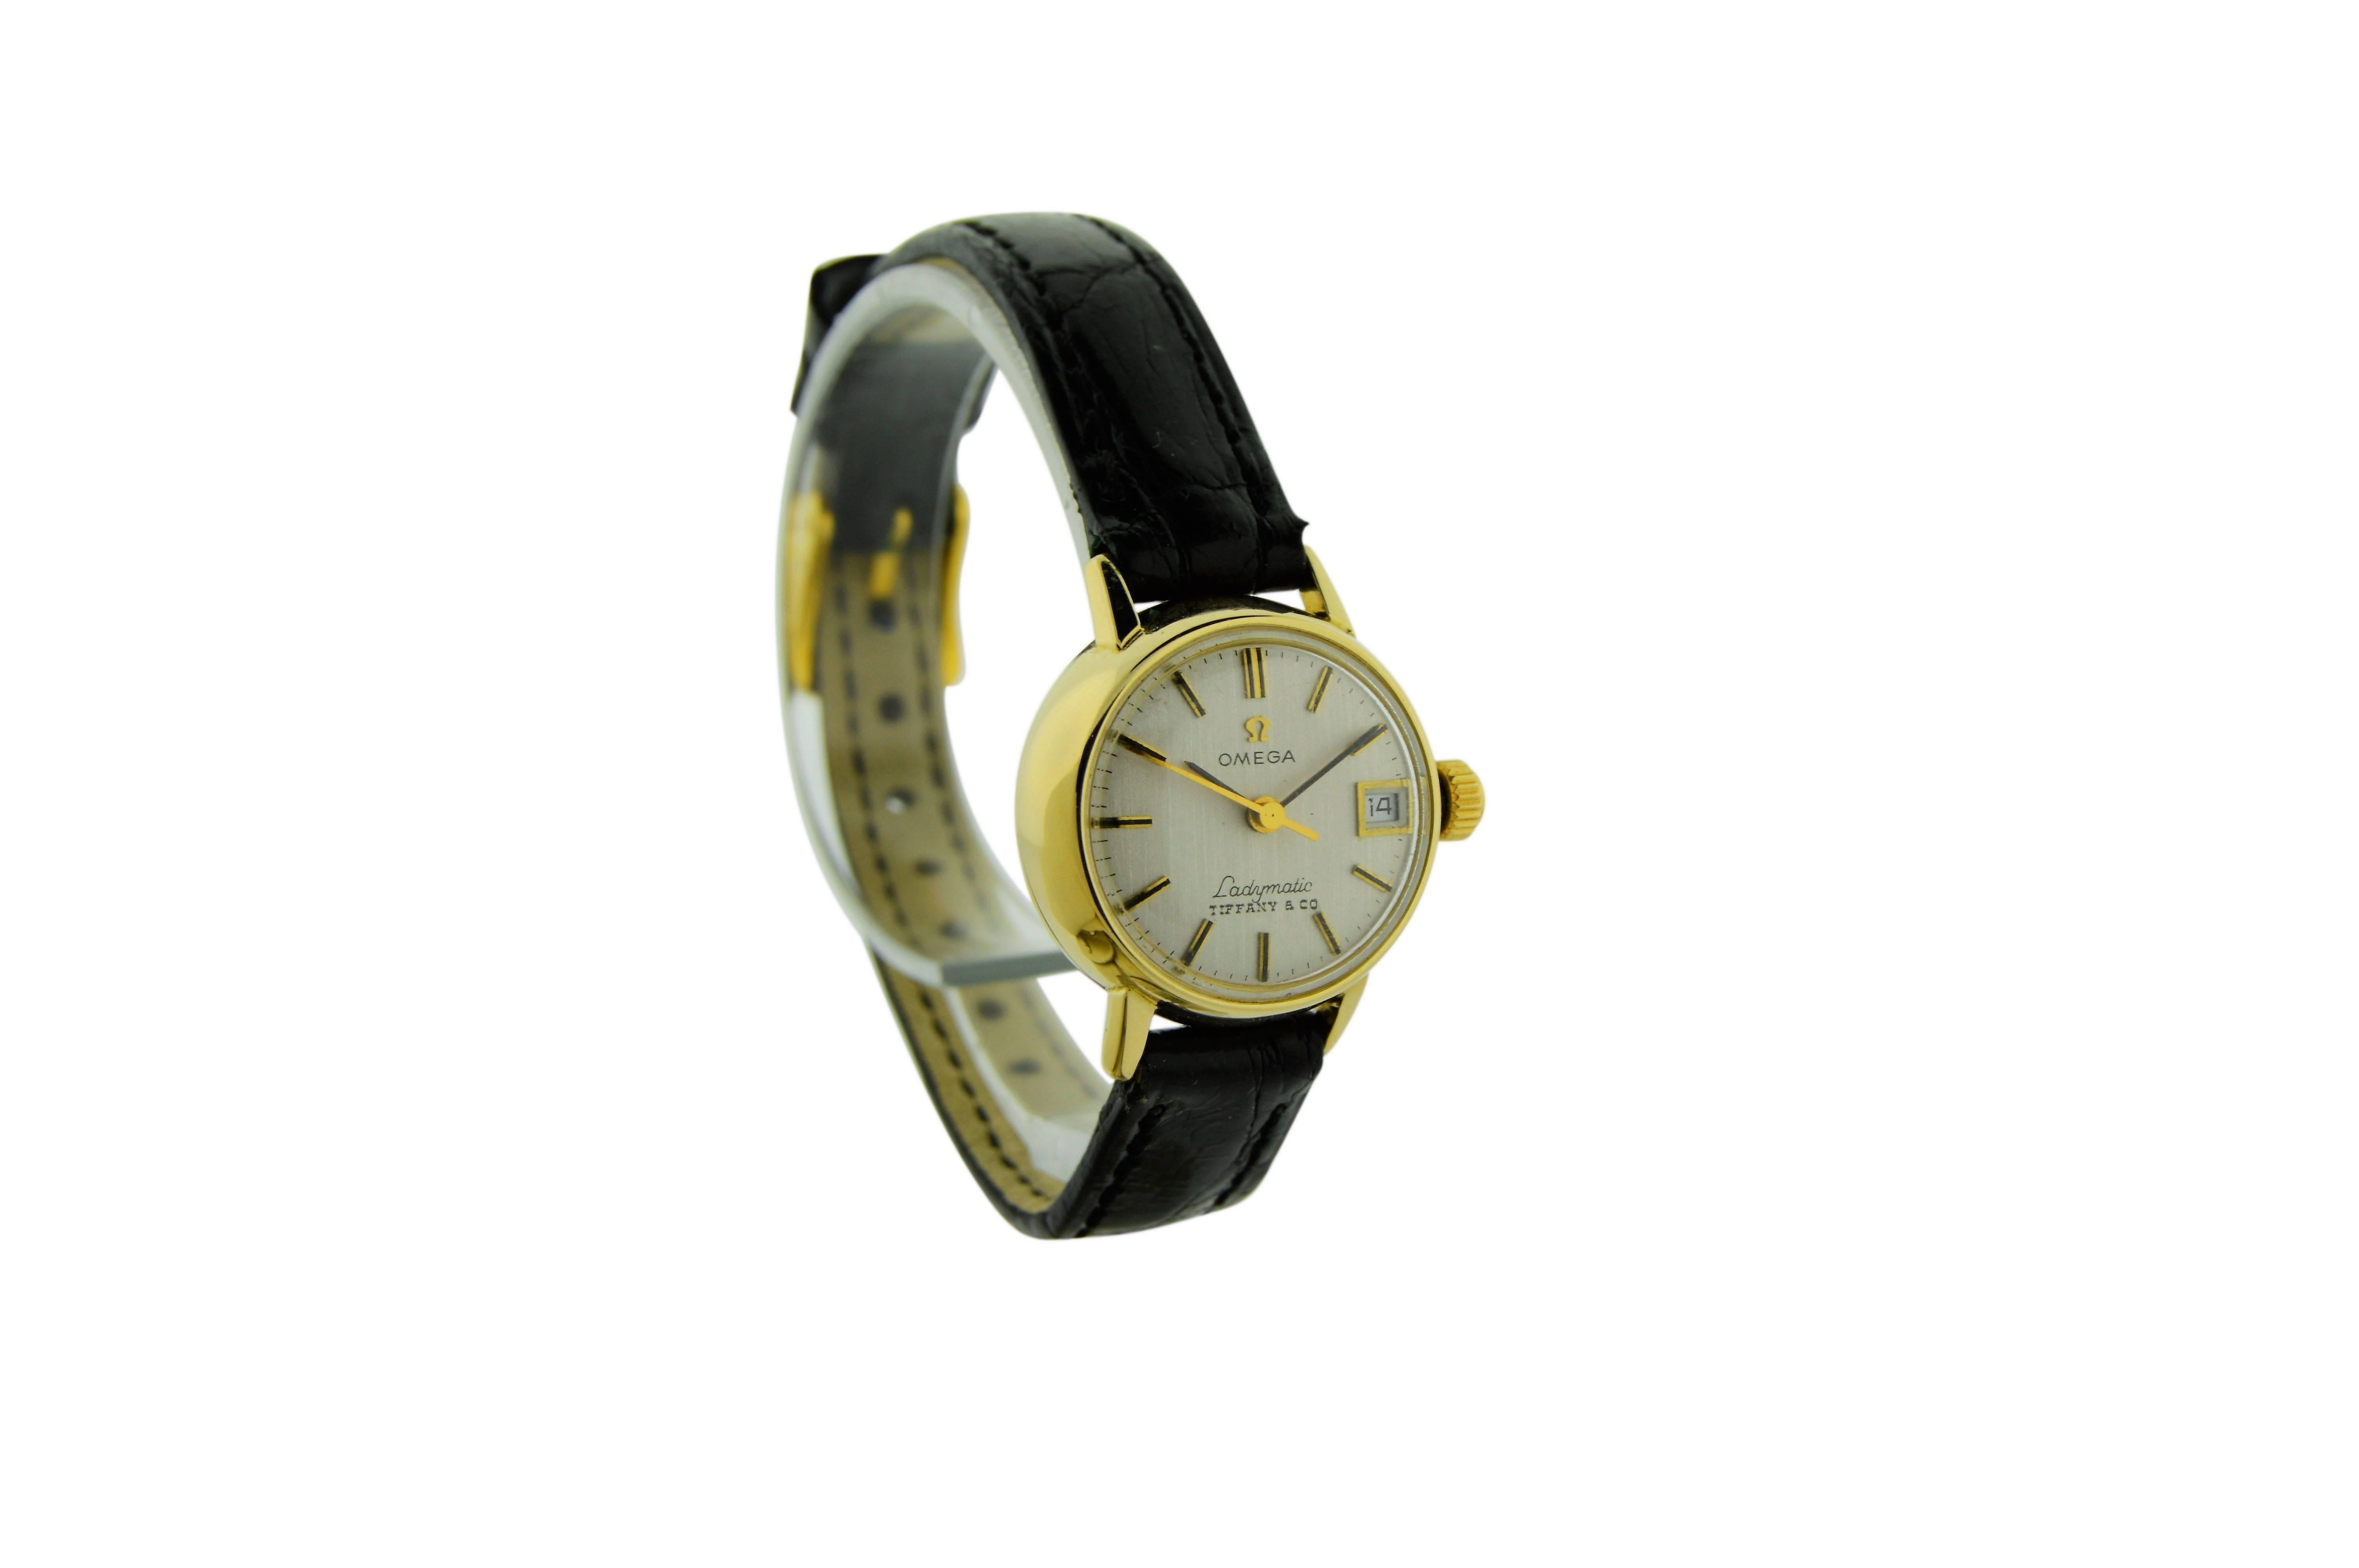 FACTORY / HOUSE: Omega Watch Company
STYLE / REFERENCE: Automatic / Date / Strap 
METAL / MATERIAL: 18Kt. Yellow Gold
DIMENSIONS: 25mm X 21mm
CIRCA: 1960's
MOVEMENT / CALIBER: Automatic / 17 Jewels 
DIAL / HANDS: Original Silvered Linen with Baton